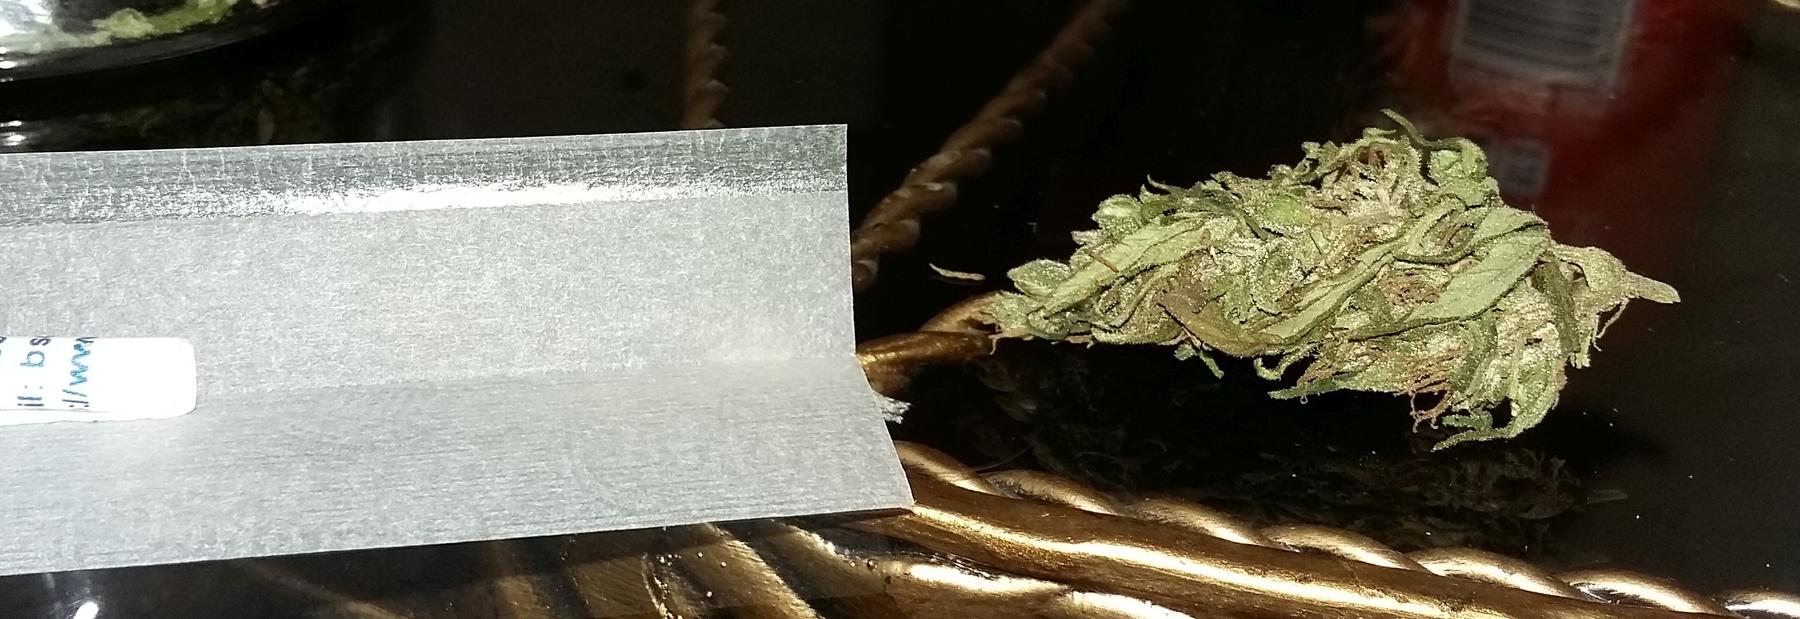 a small plant with a small plant in the middle of the plant - File:A bud of malawi gold cannabis str